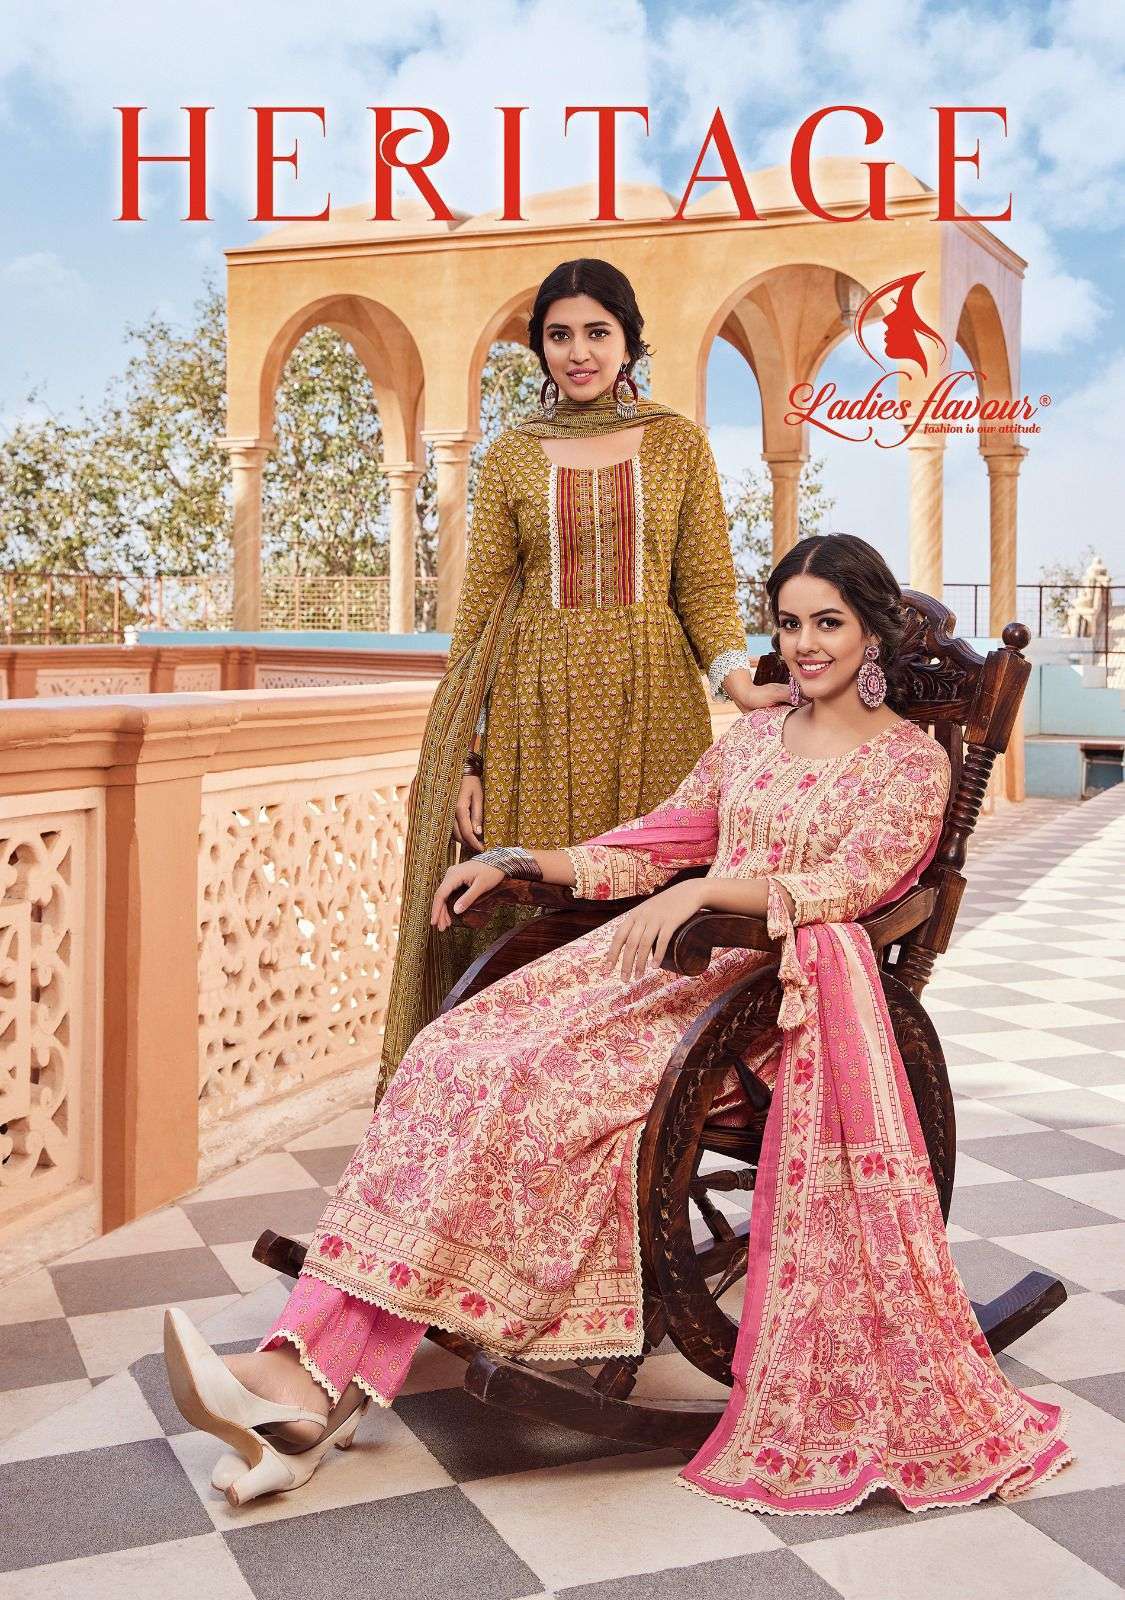 Ladies flavour presents Heritage pure cotton exclusive designer kurtis with pant and dupatta catalog wholesaler and exporters 